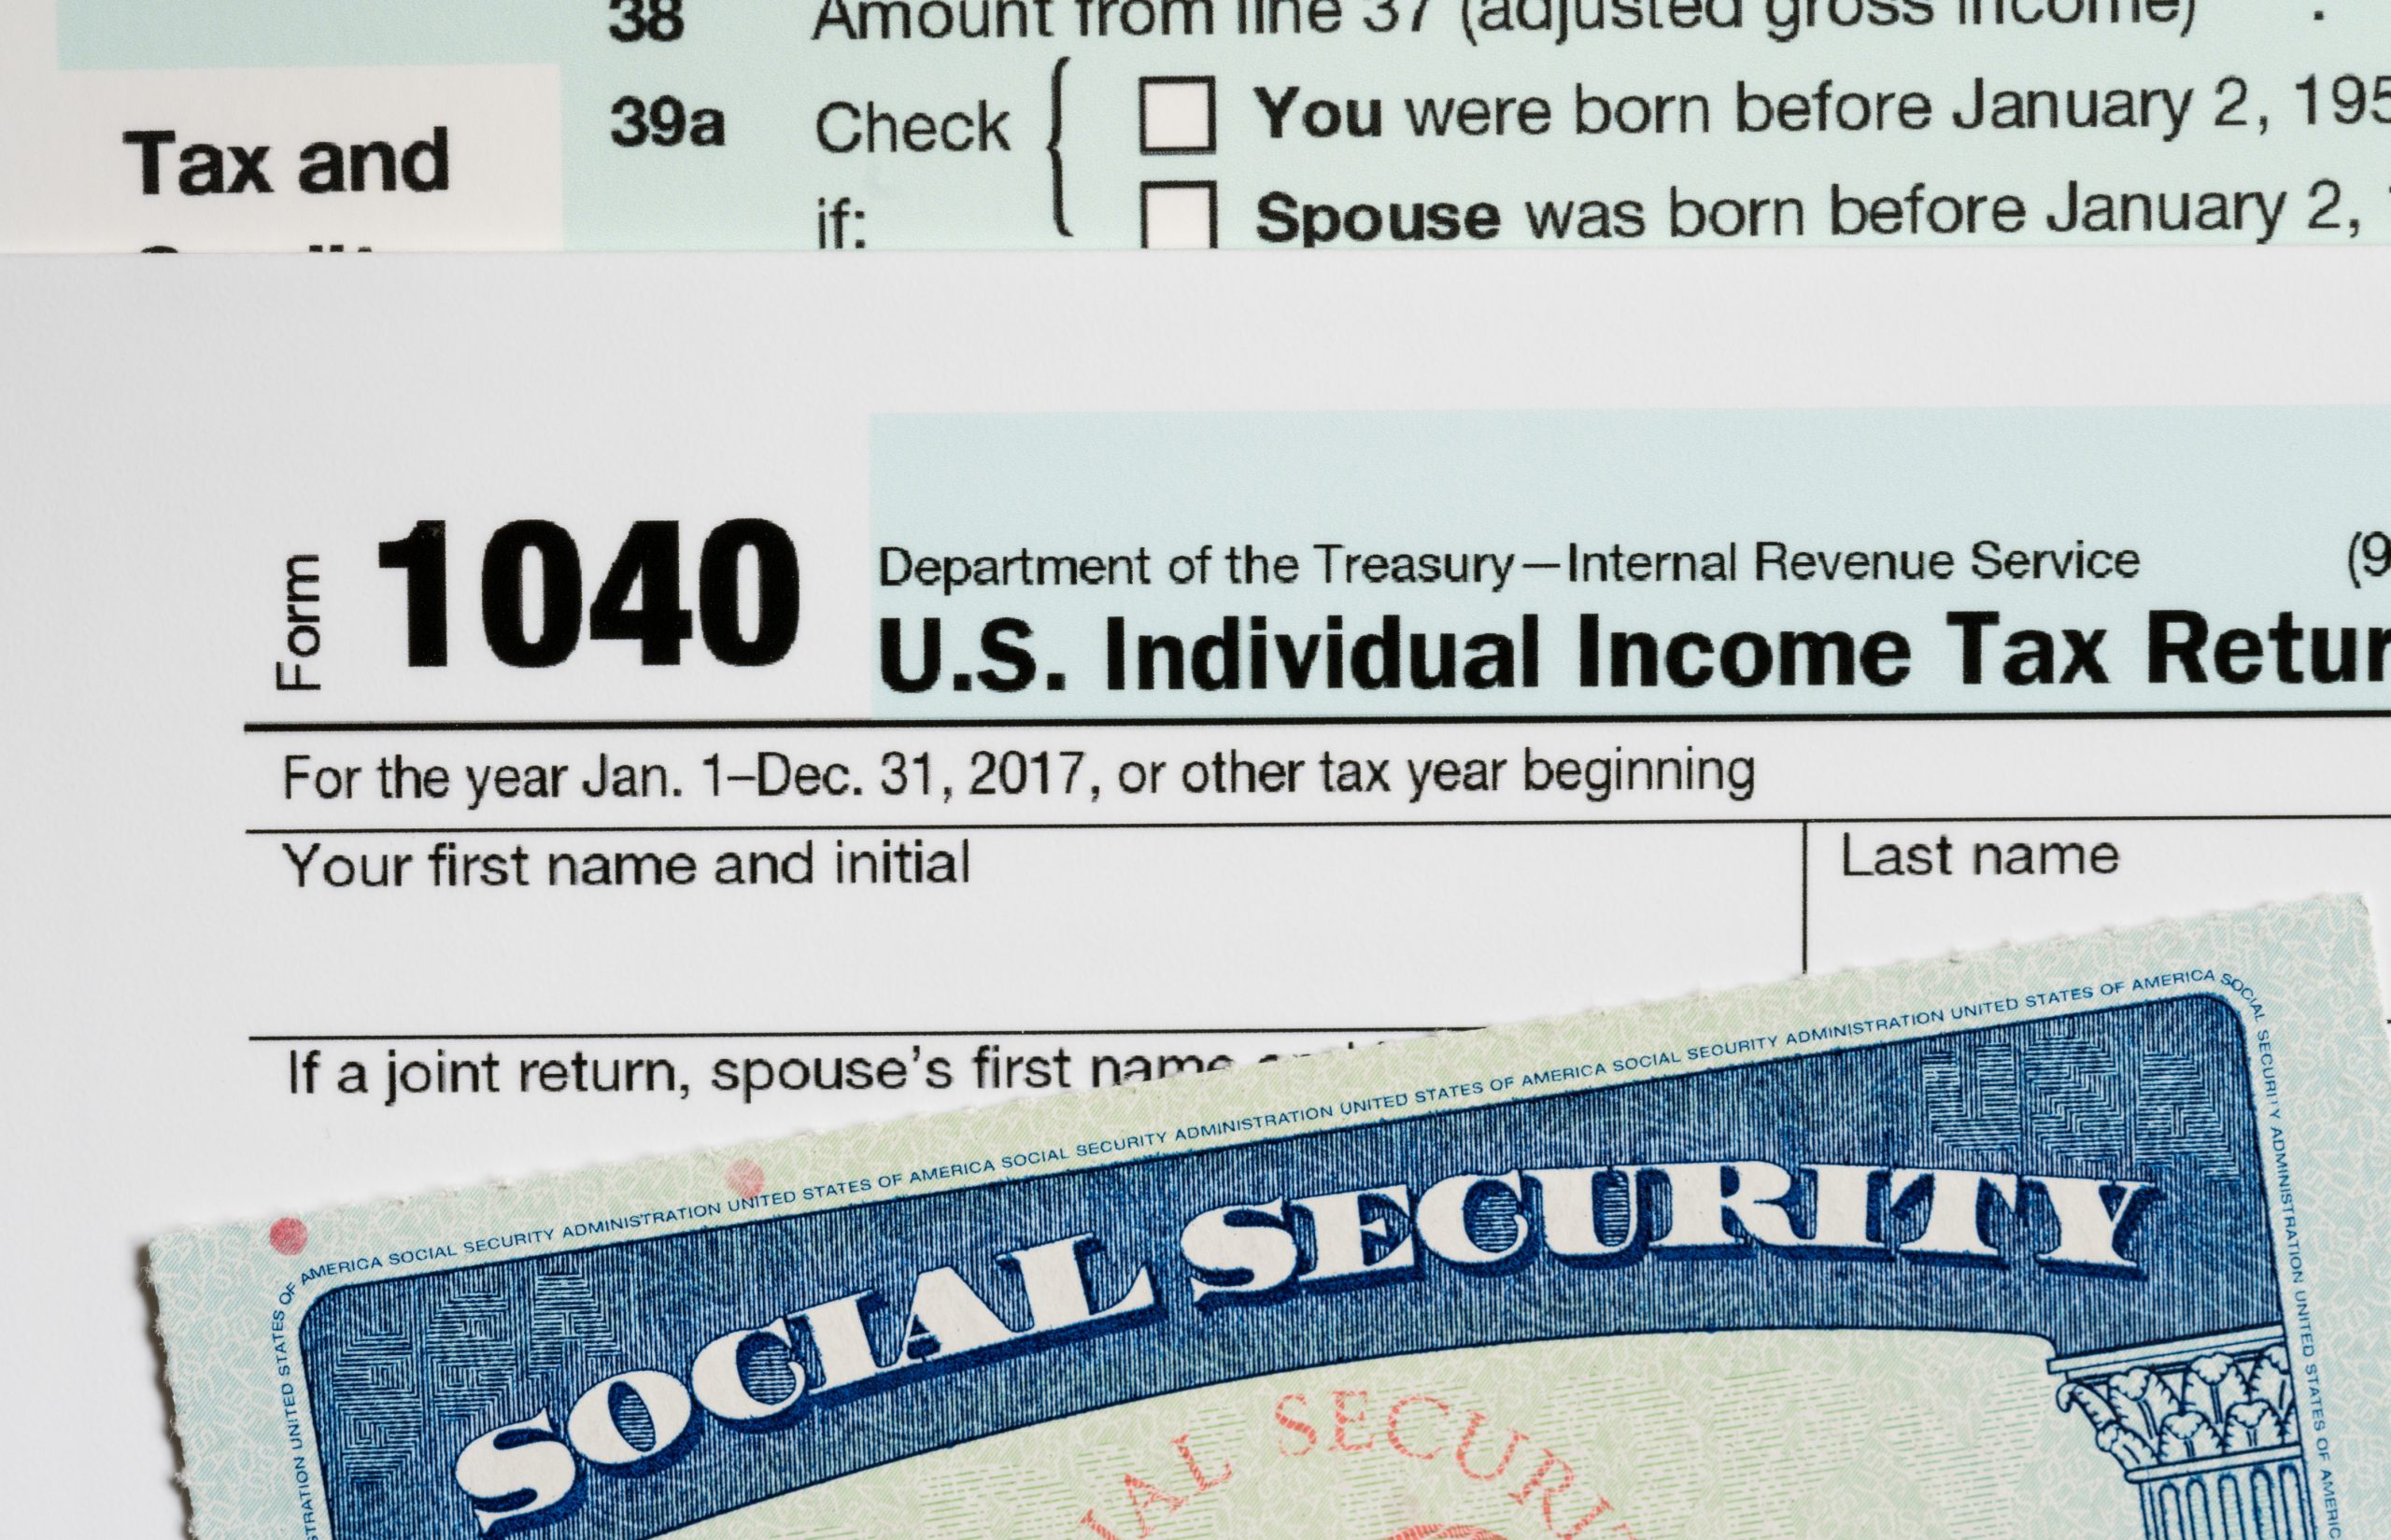 Social Security card in the USA laid on top of Form 1040 tax return of income in retirement